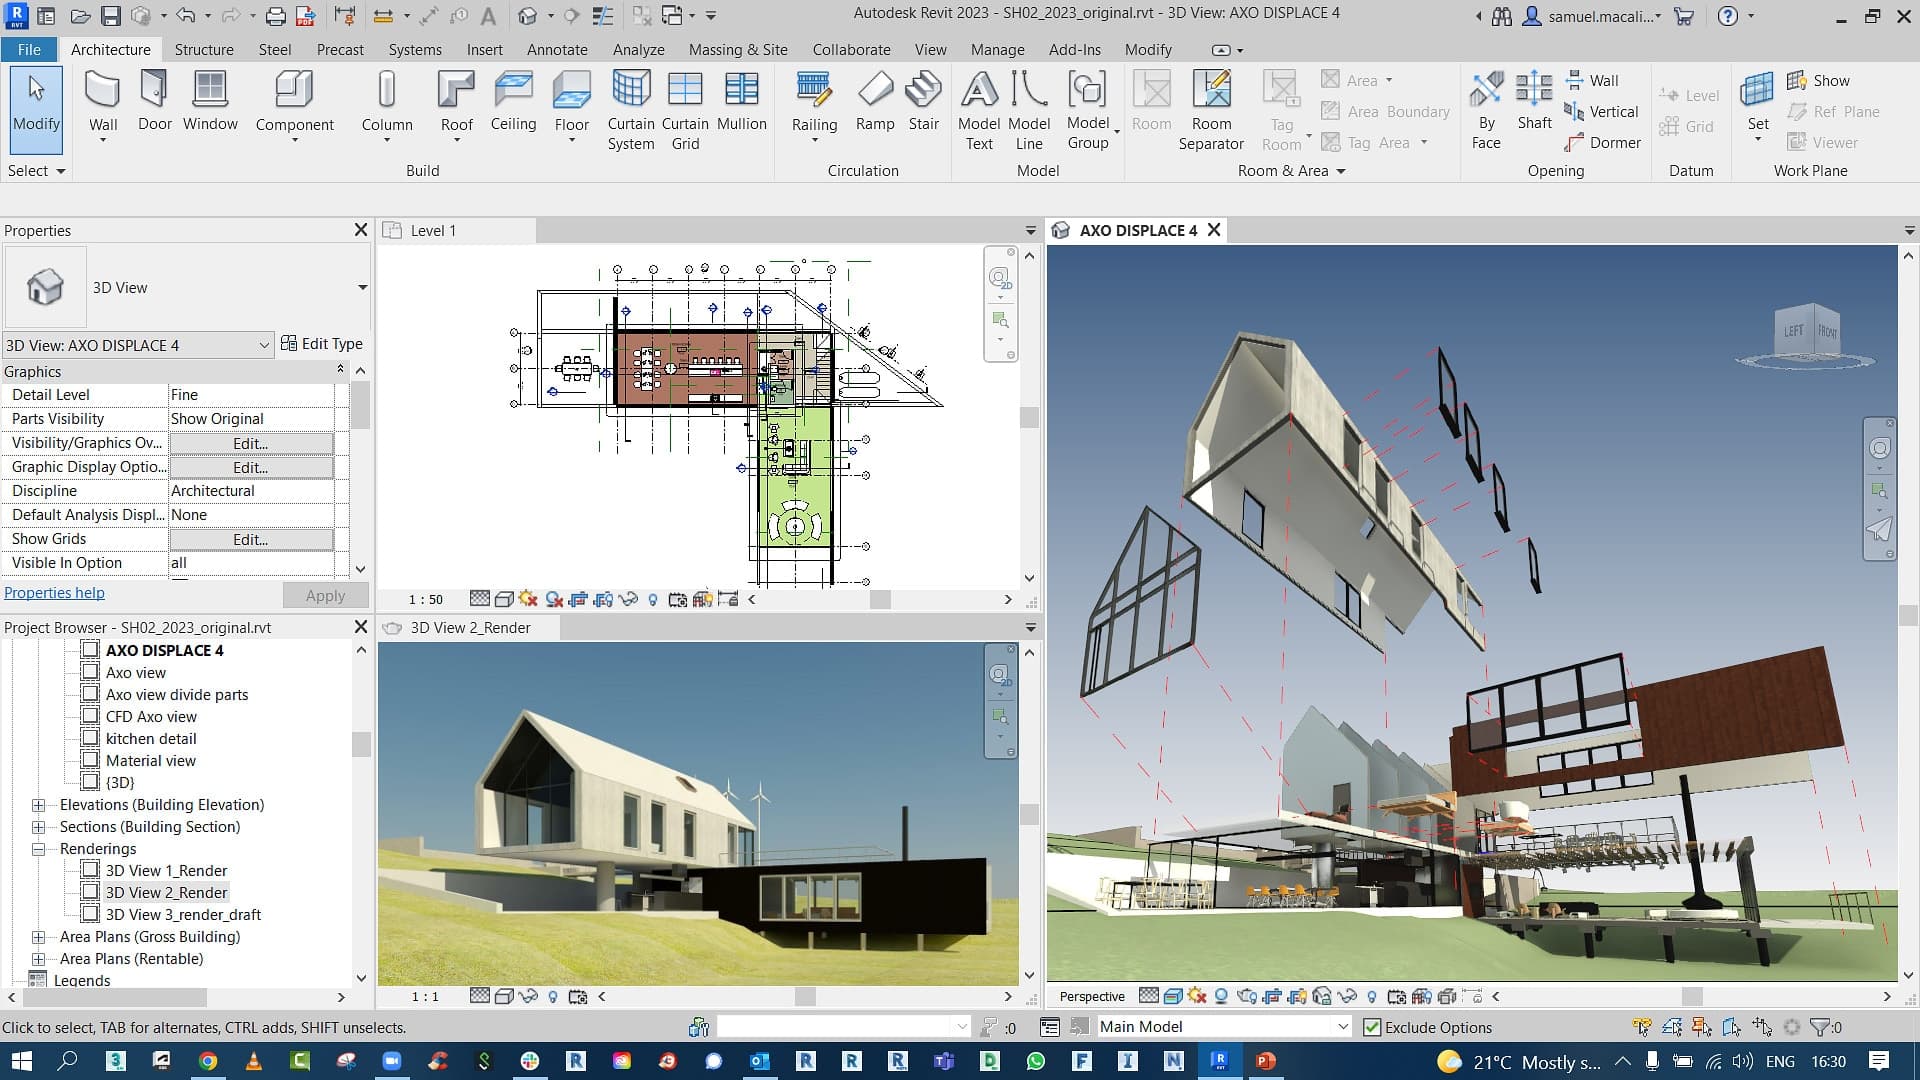 Do architects use CAD or Revit?